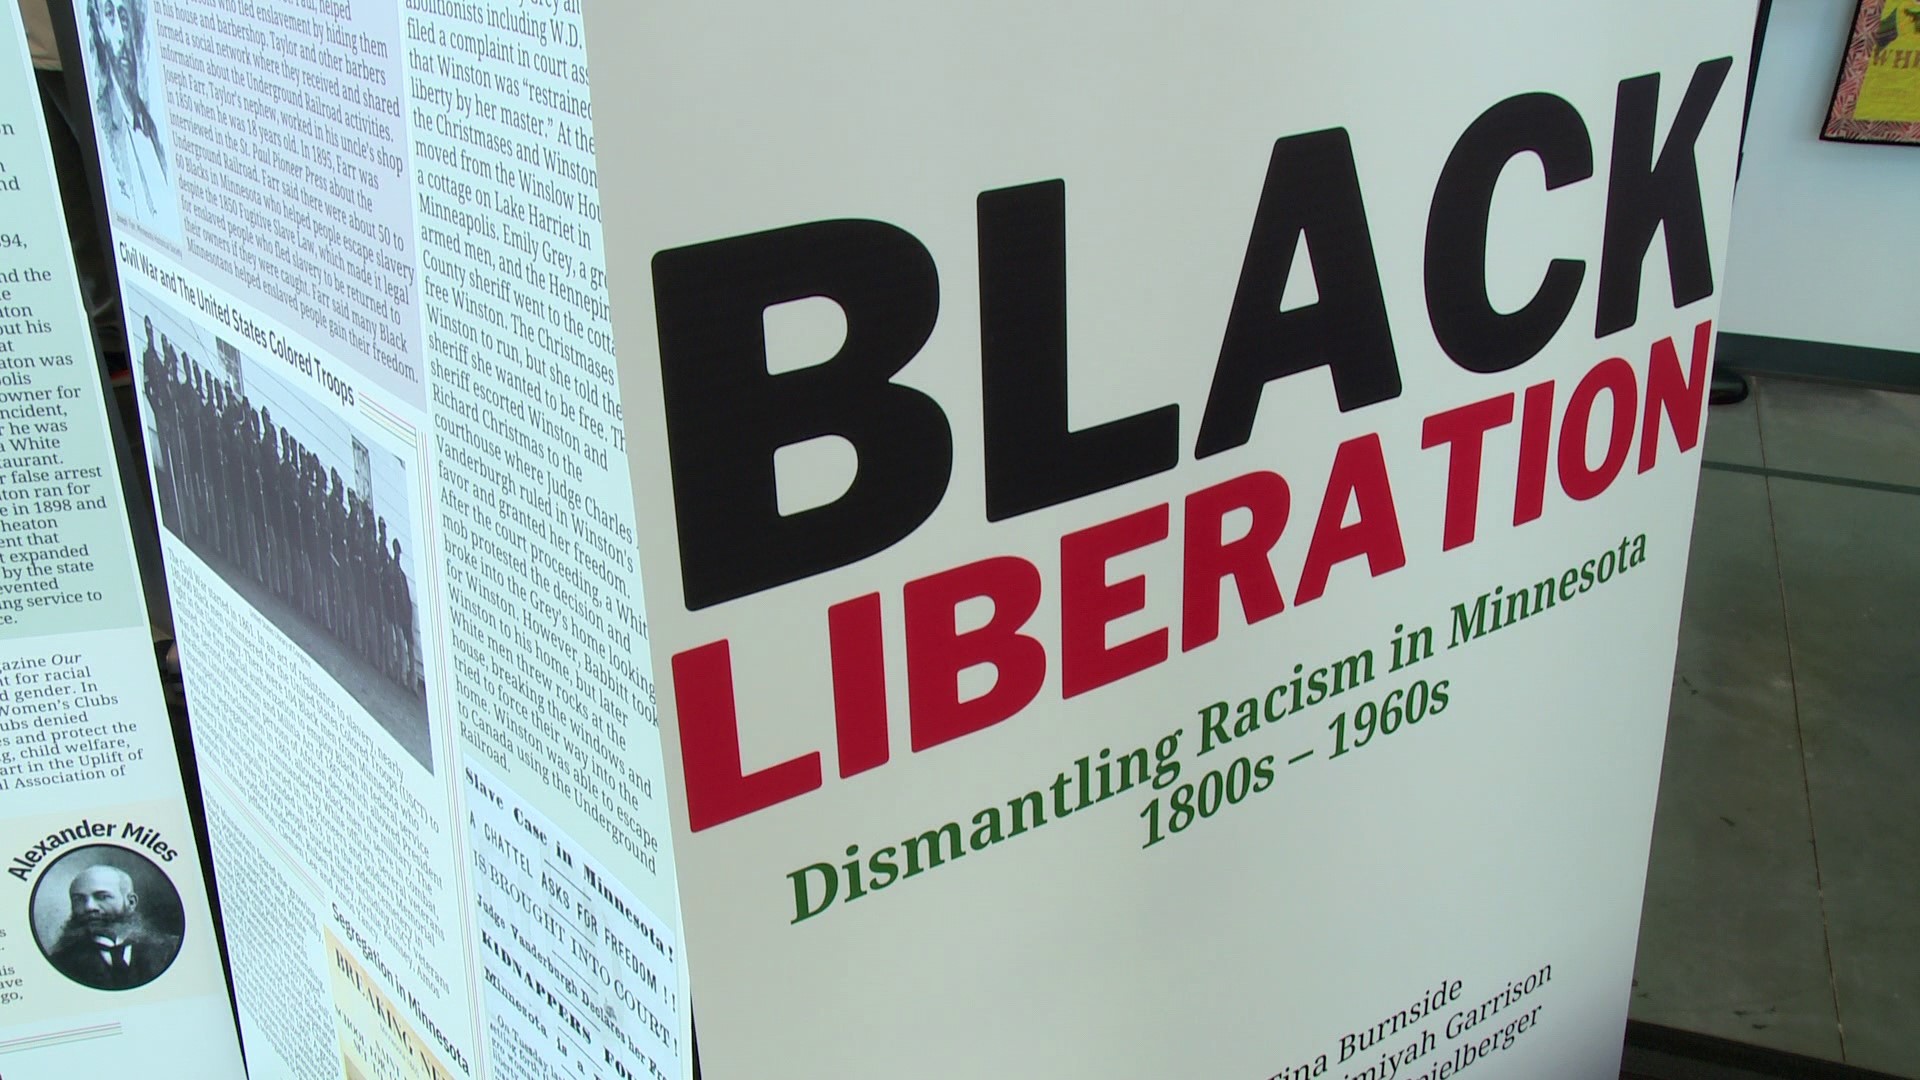 "Black Liberation: Dismantling Racism in Minnesota" highlights Black-led movements and organizations.